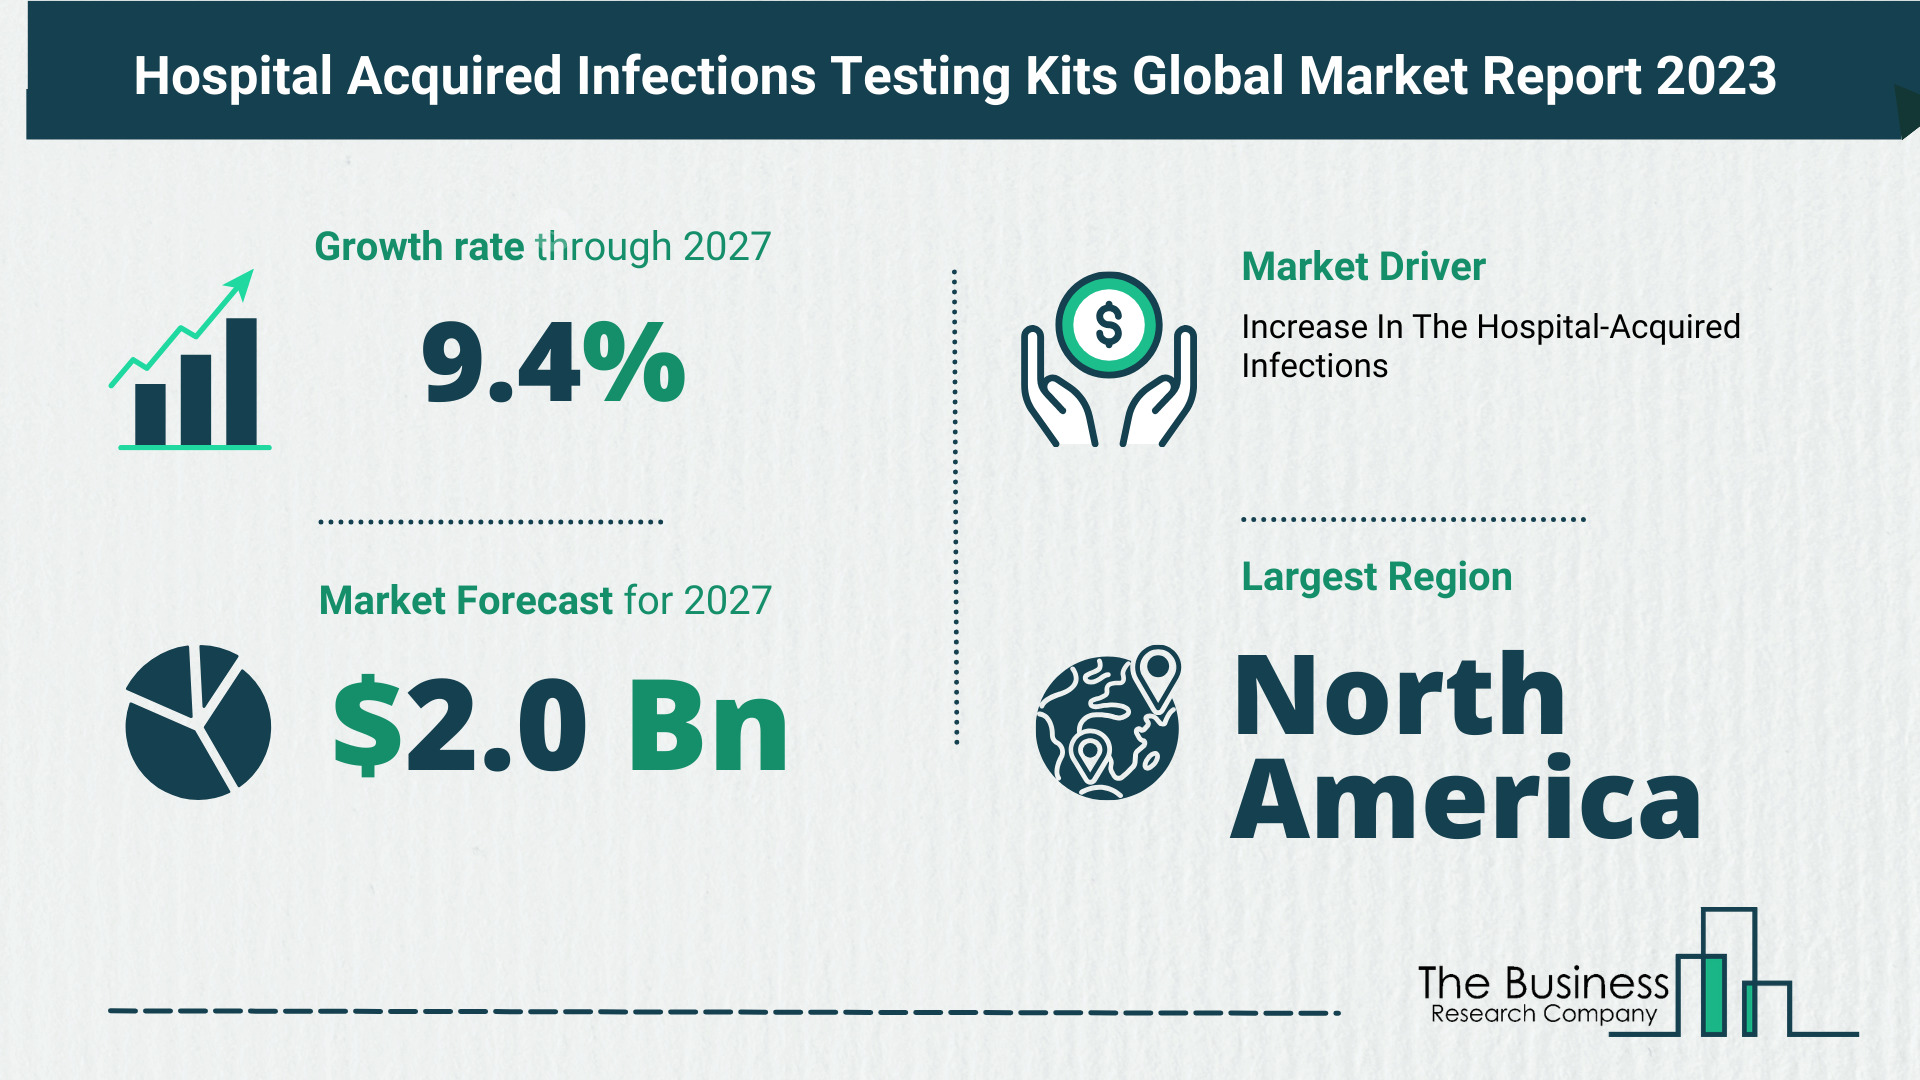 Key Trends And Drivers In The Hospital Acquired Infections Testing Kits Market 2023